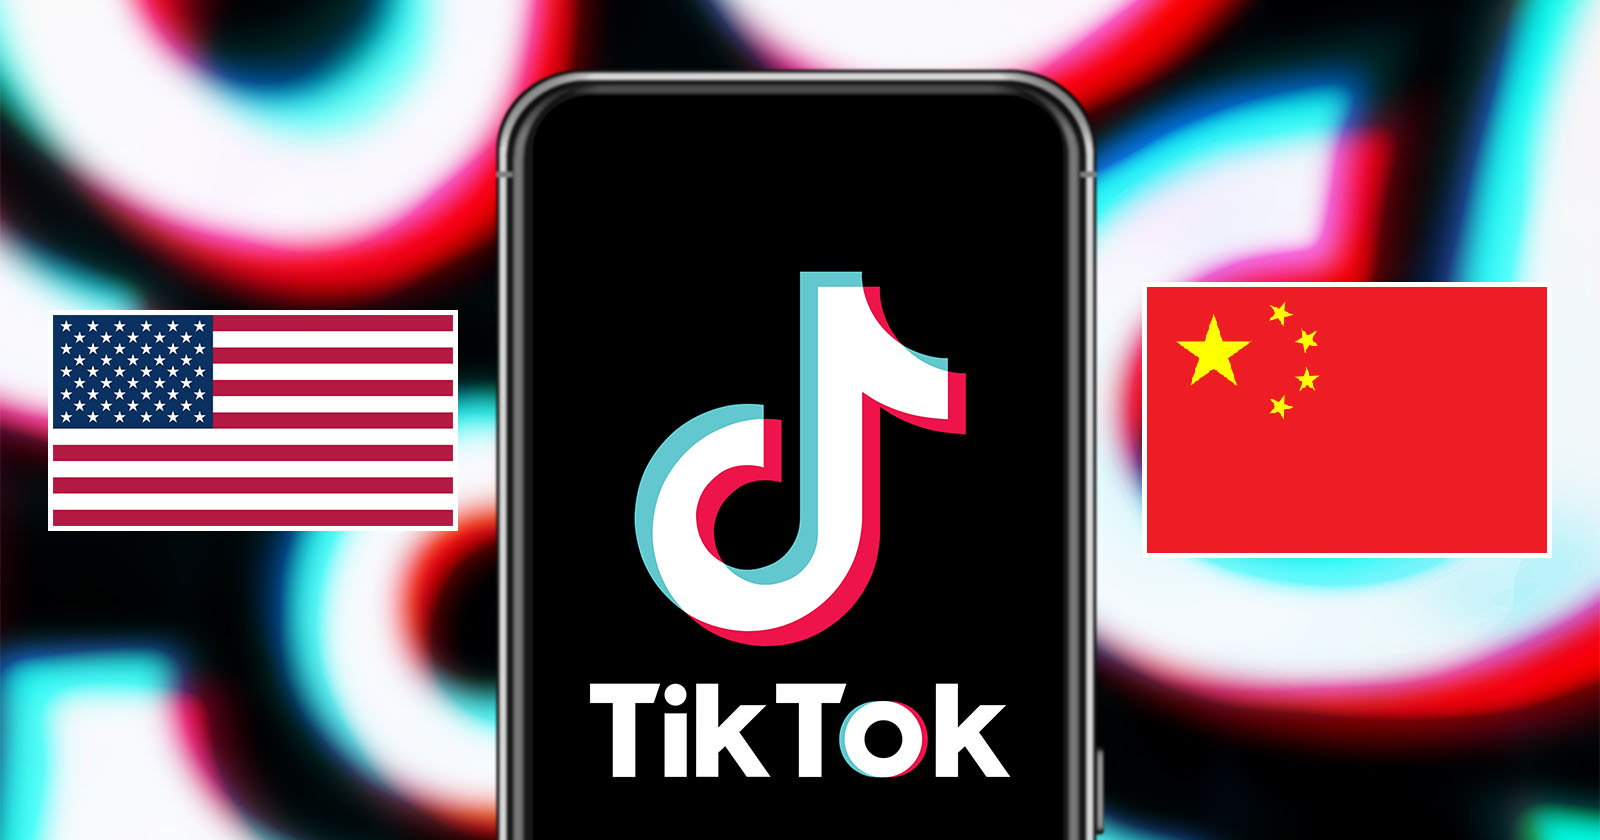 House Passes TikTok Ban Bill: What It Means for TikTok Users